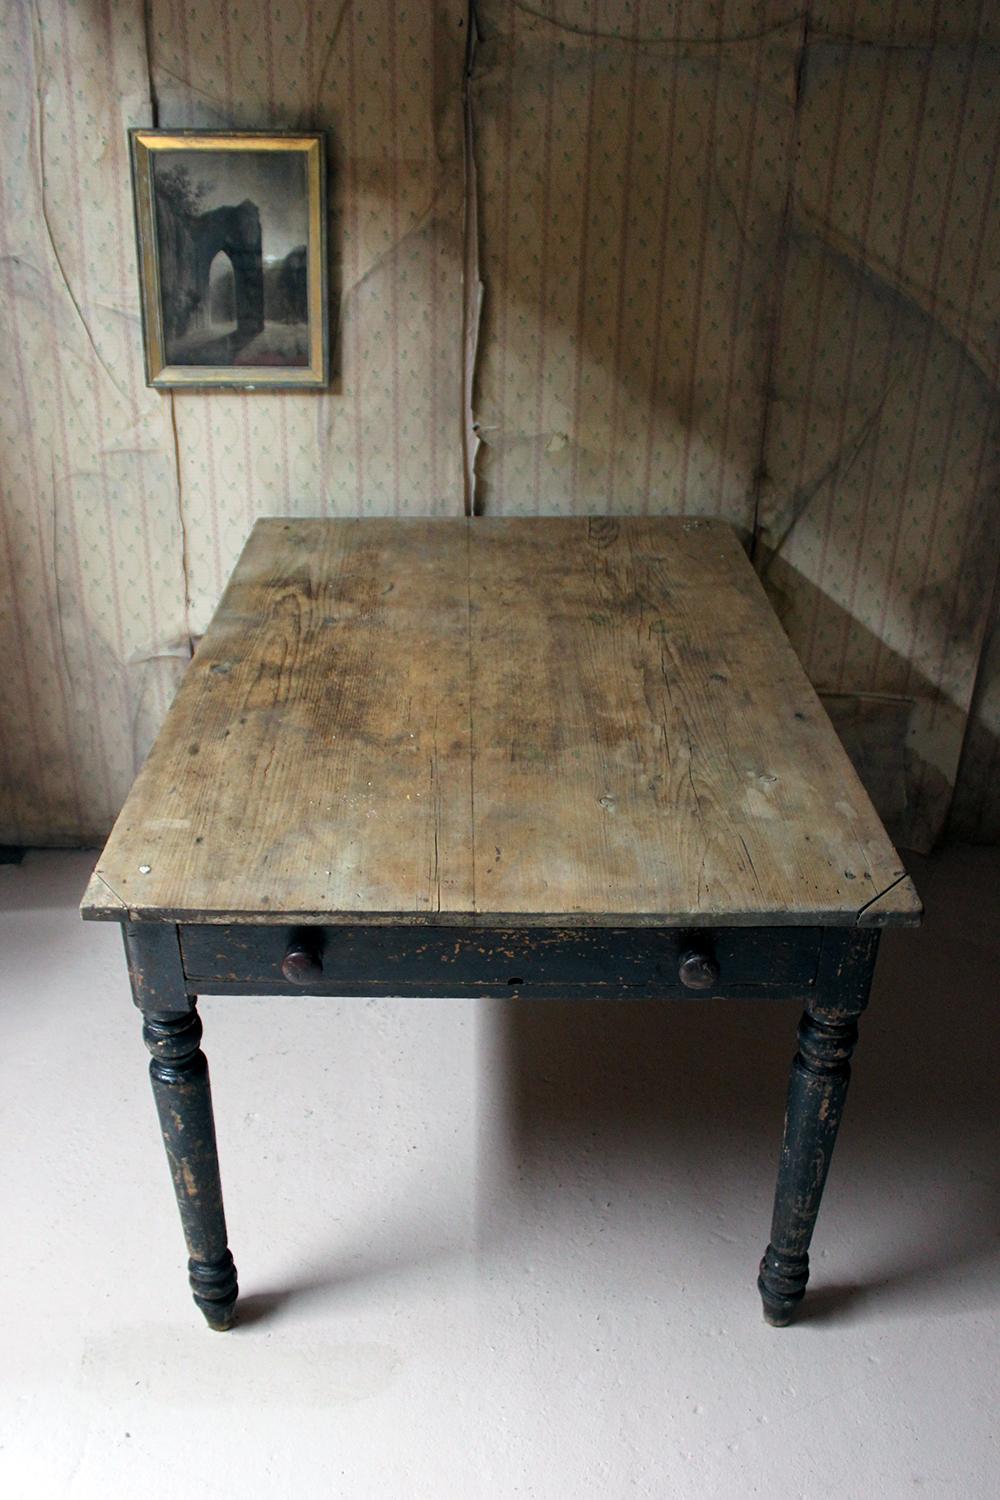 The beautiful time worn painted pine farmhouse kitchen table, the original black paint distressed commensurate with age, having a four-plank top over two frieze drawers, one opening to reveal compartmentalisation for cutlery, the whole standing on